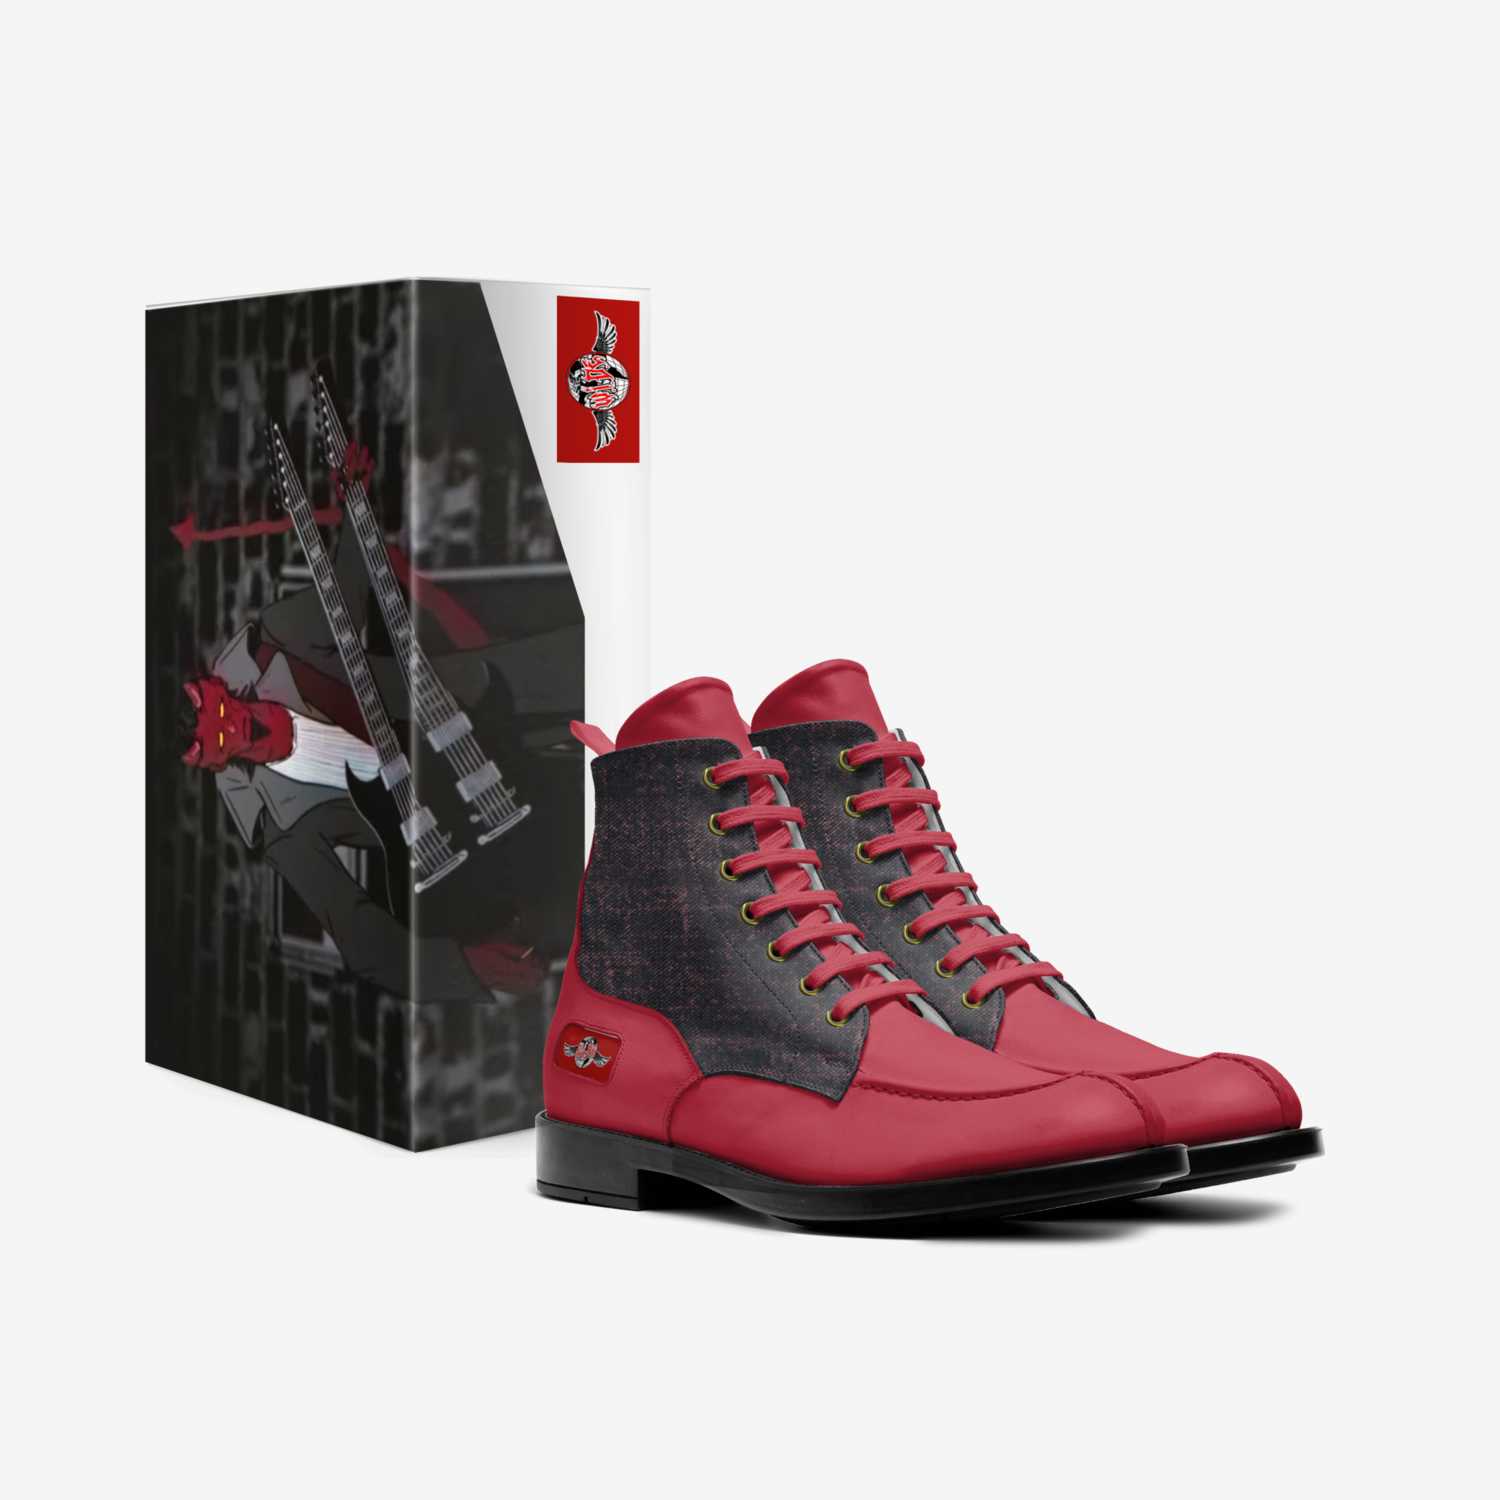 Red RockStar custom made in Italy shoes by Tha Real Mccoy | Box view